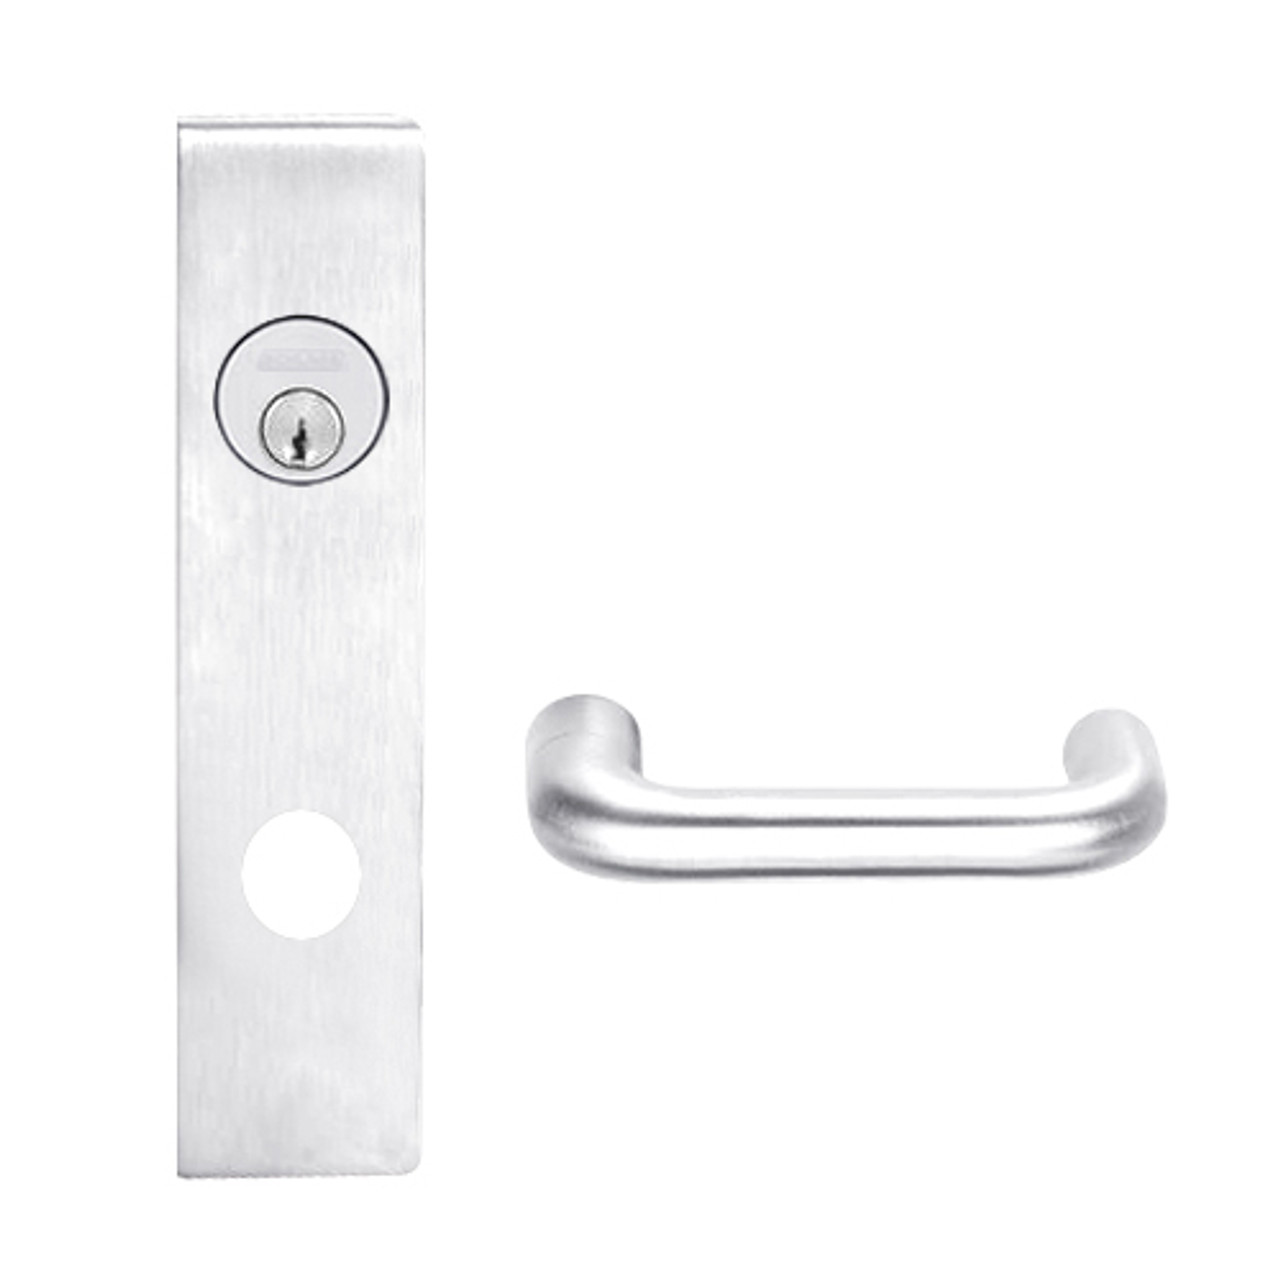 L9026L-03L-625 Schlage L Series Less Cylinder Exit Lock with Cylinder Commercial Mortise Lock with 03 Cast Lever Design in Bright Chrome